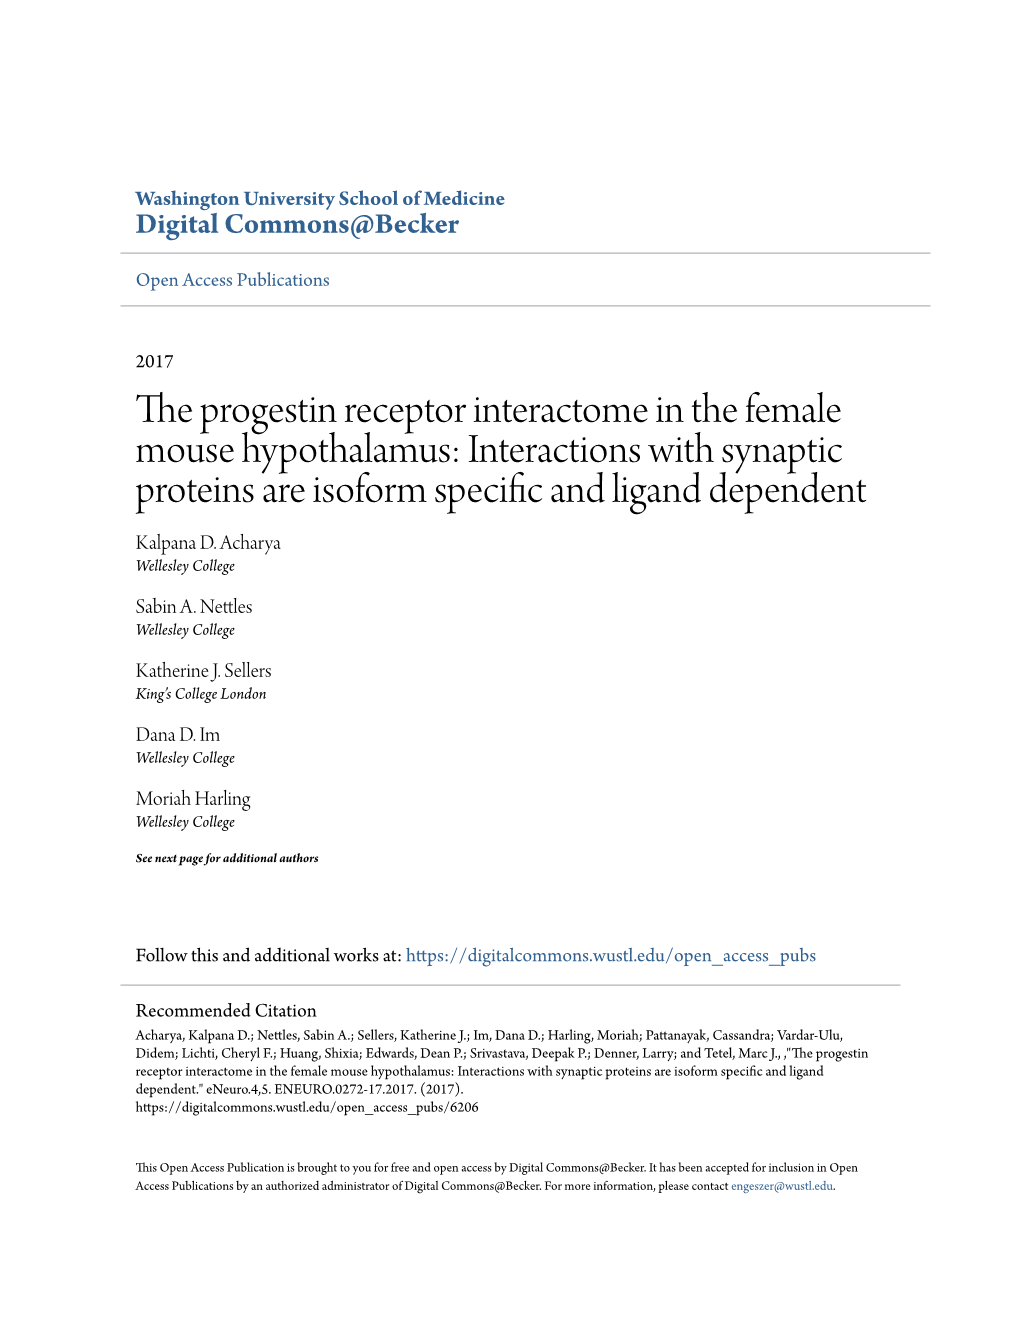 The Progestin Receptor Interactome in the Female Mouse Hypothalamus: Interactions with Synaptic Proteins Are Isoform Specific Nda Ligand Dependent Kalpana D